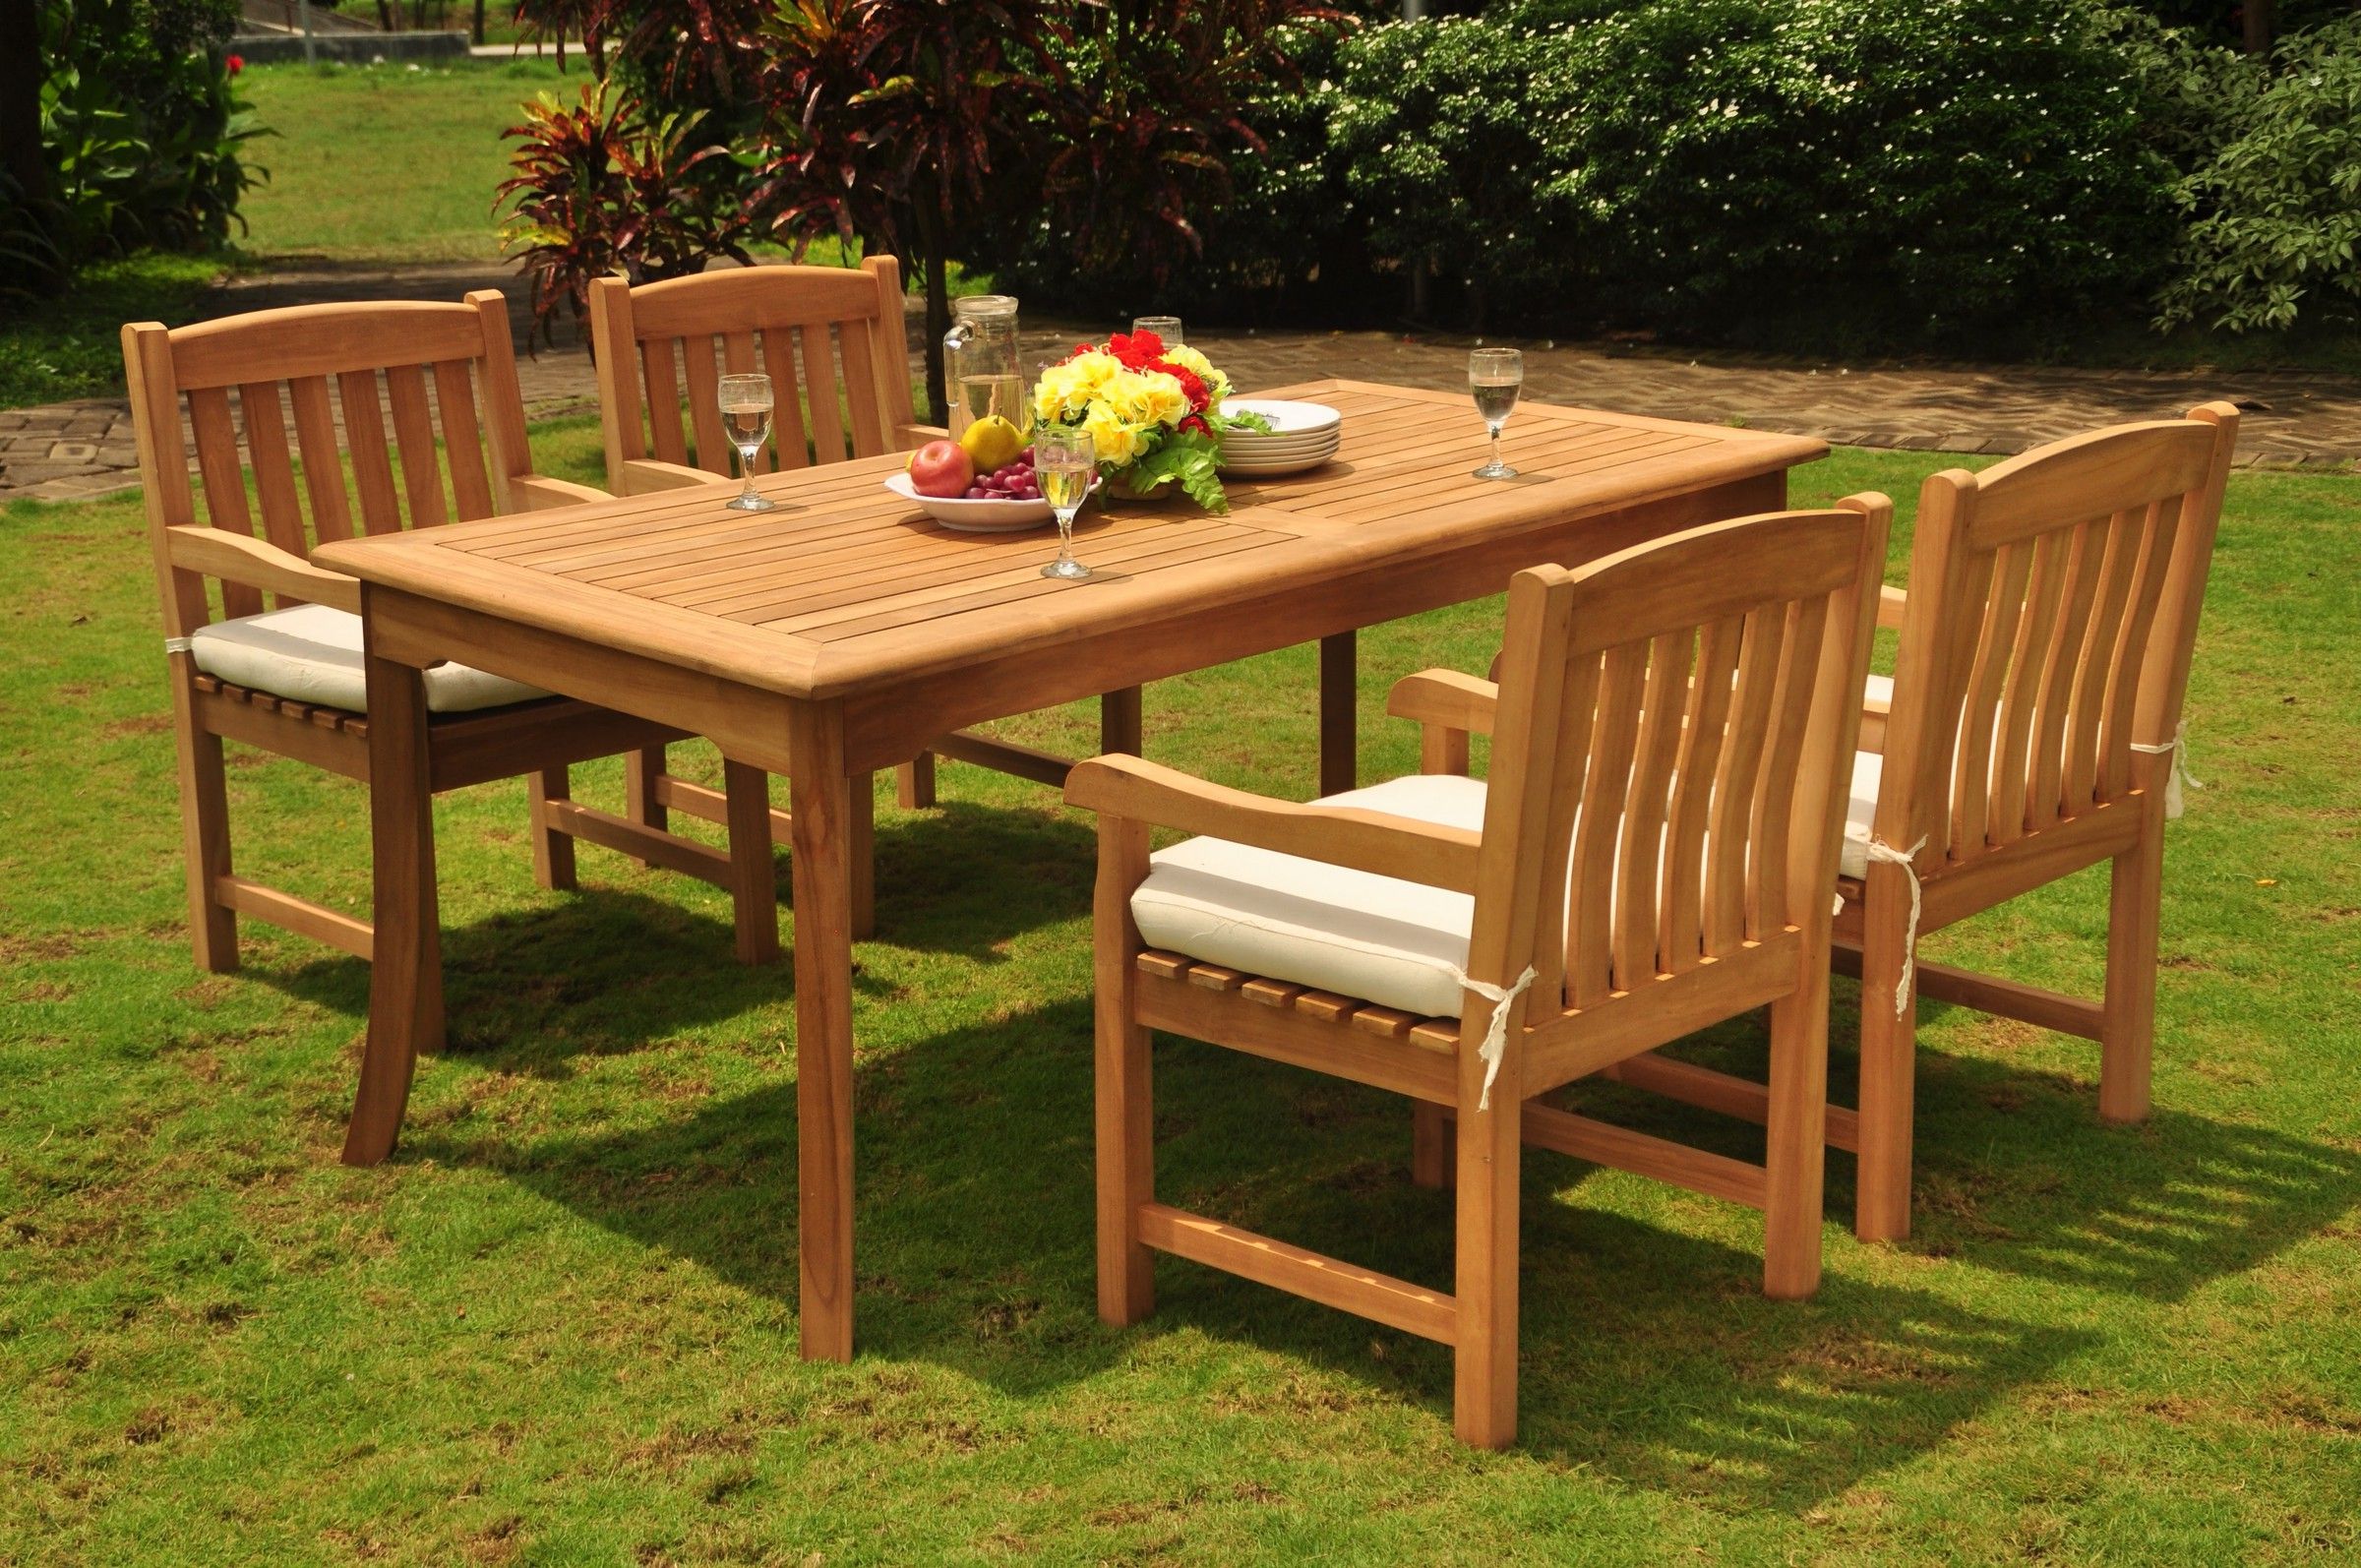 Teak Wood Rectangular Patio Dining Sets Throughout 2019 Teak Dining Set: 4 Seater 5 Pc: 71" Rectangle Dining Table And 4 Devon (View 10 of 15)